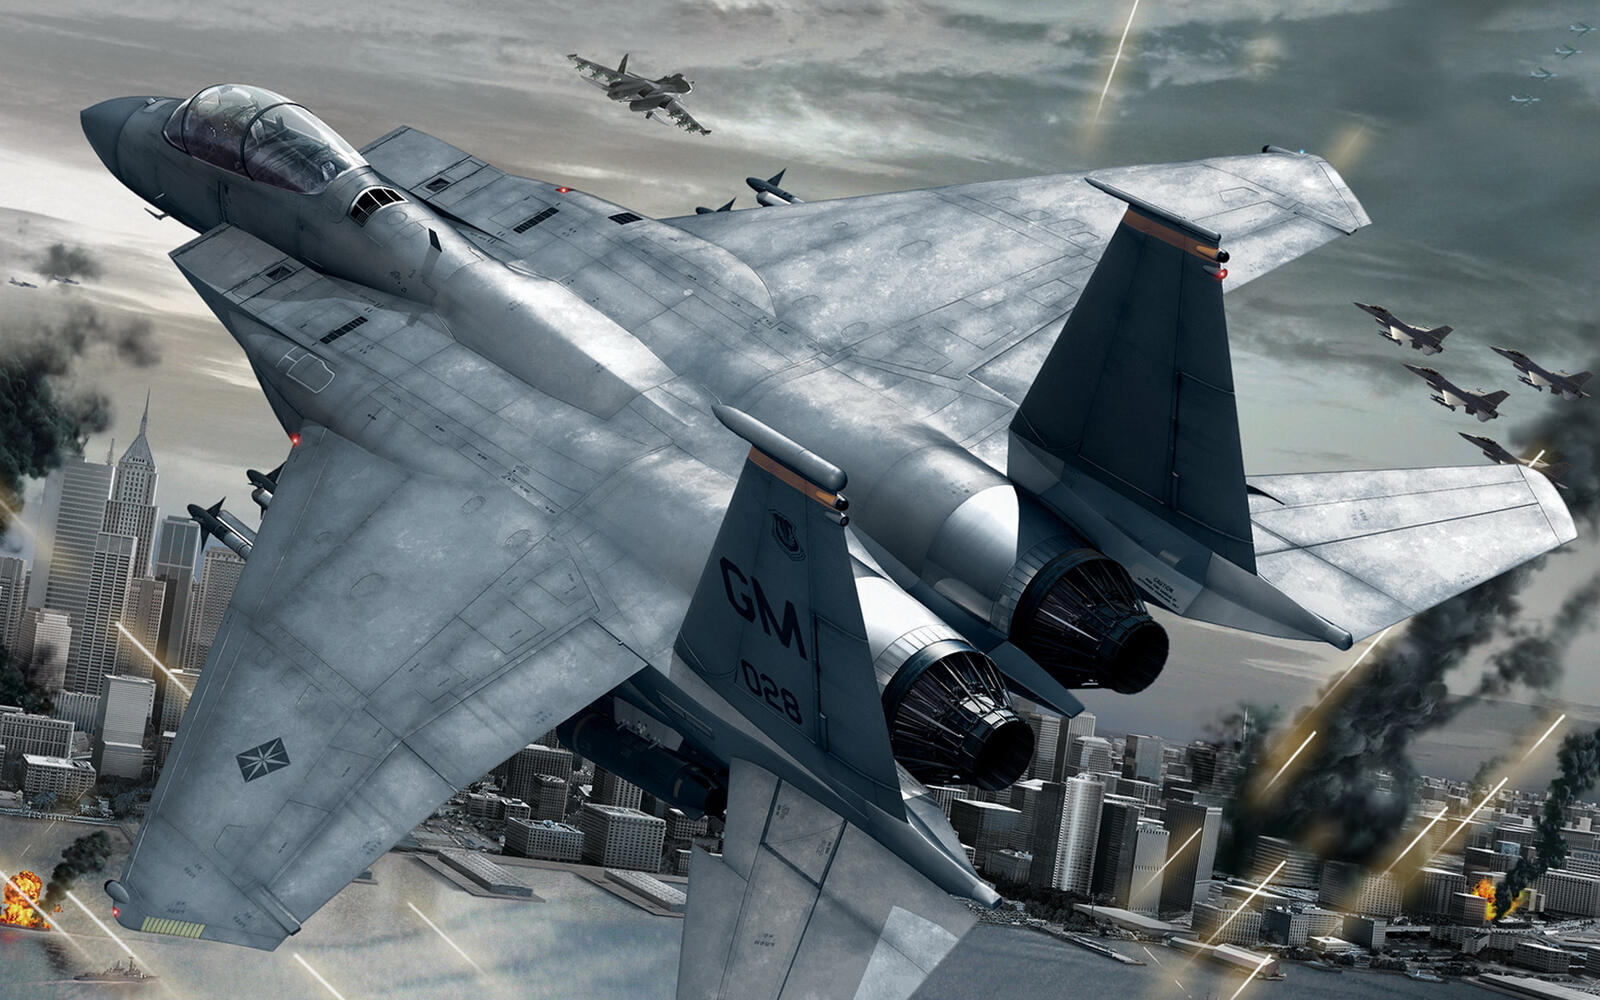 Wallpapers airplanes fighters war on the desktop